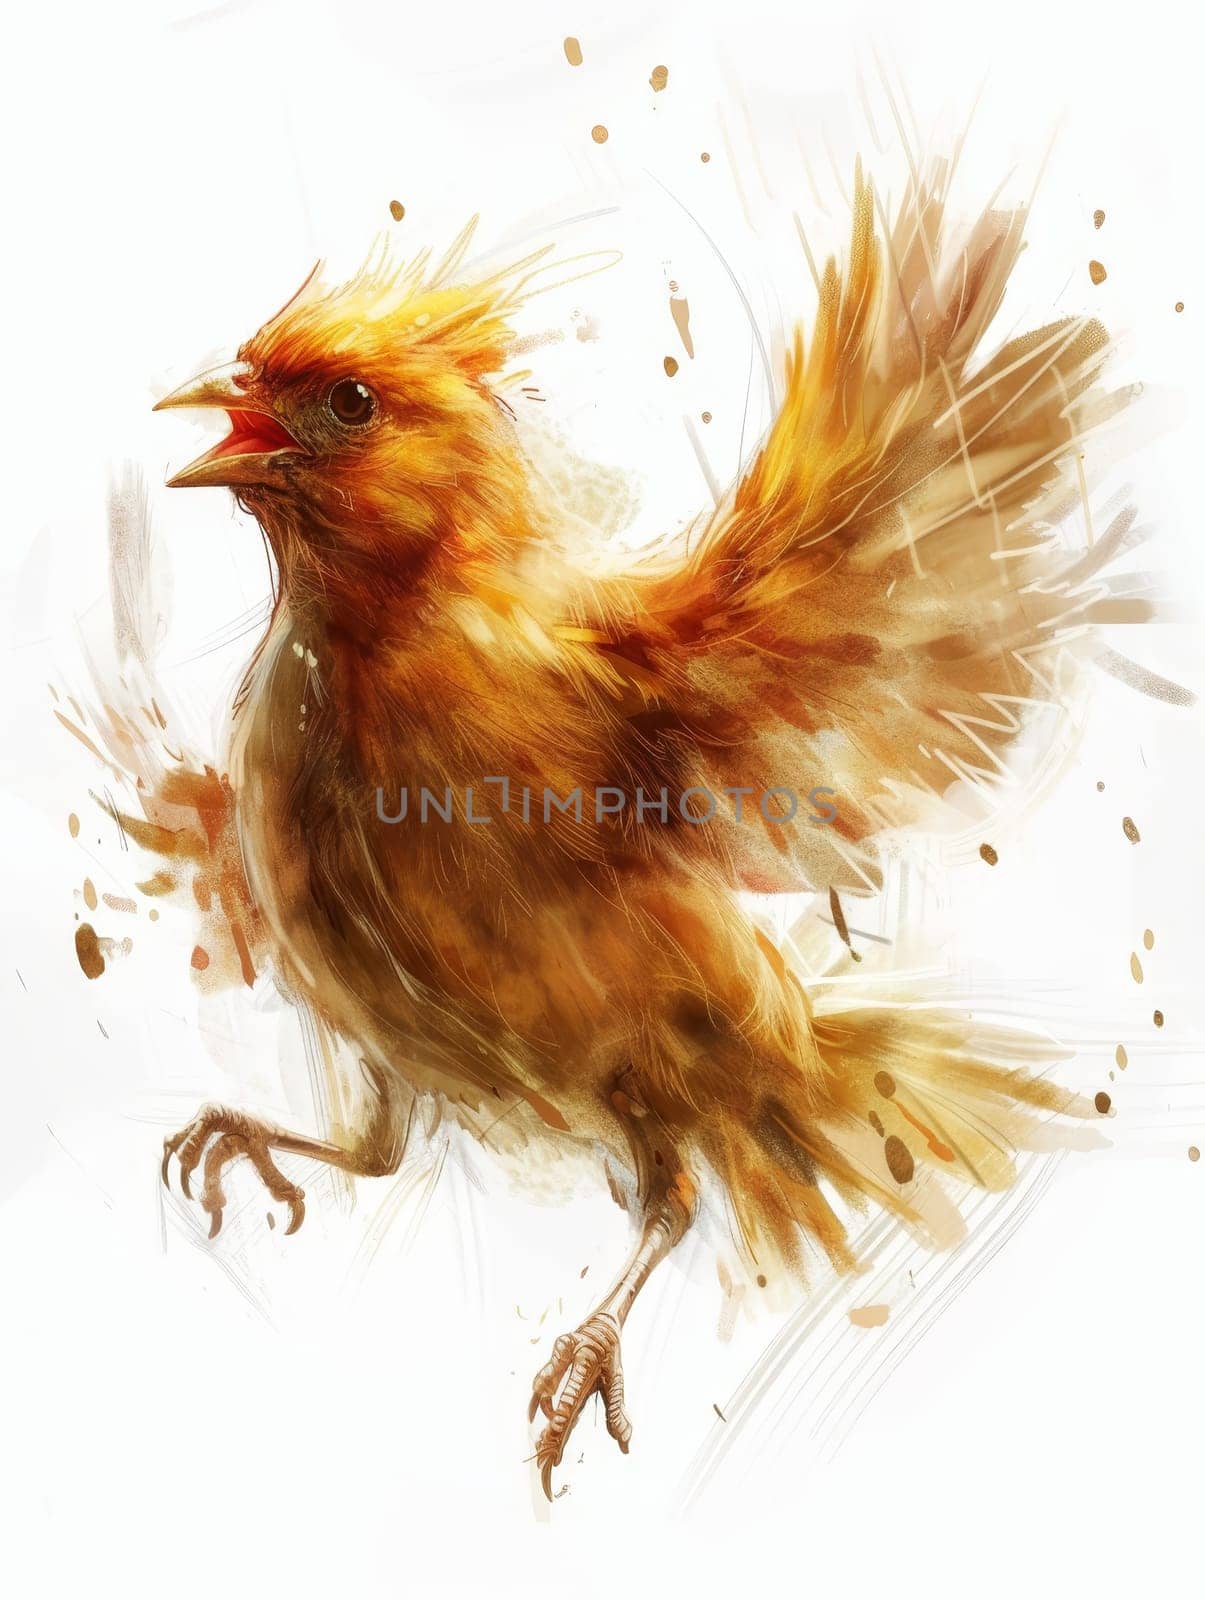 Artistic illustration of a bird in motion, painted in vibrant orange tones with expressive brush strokes